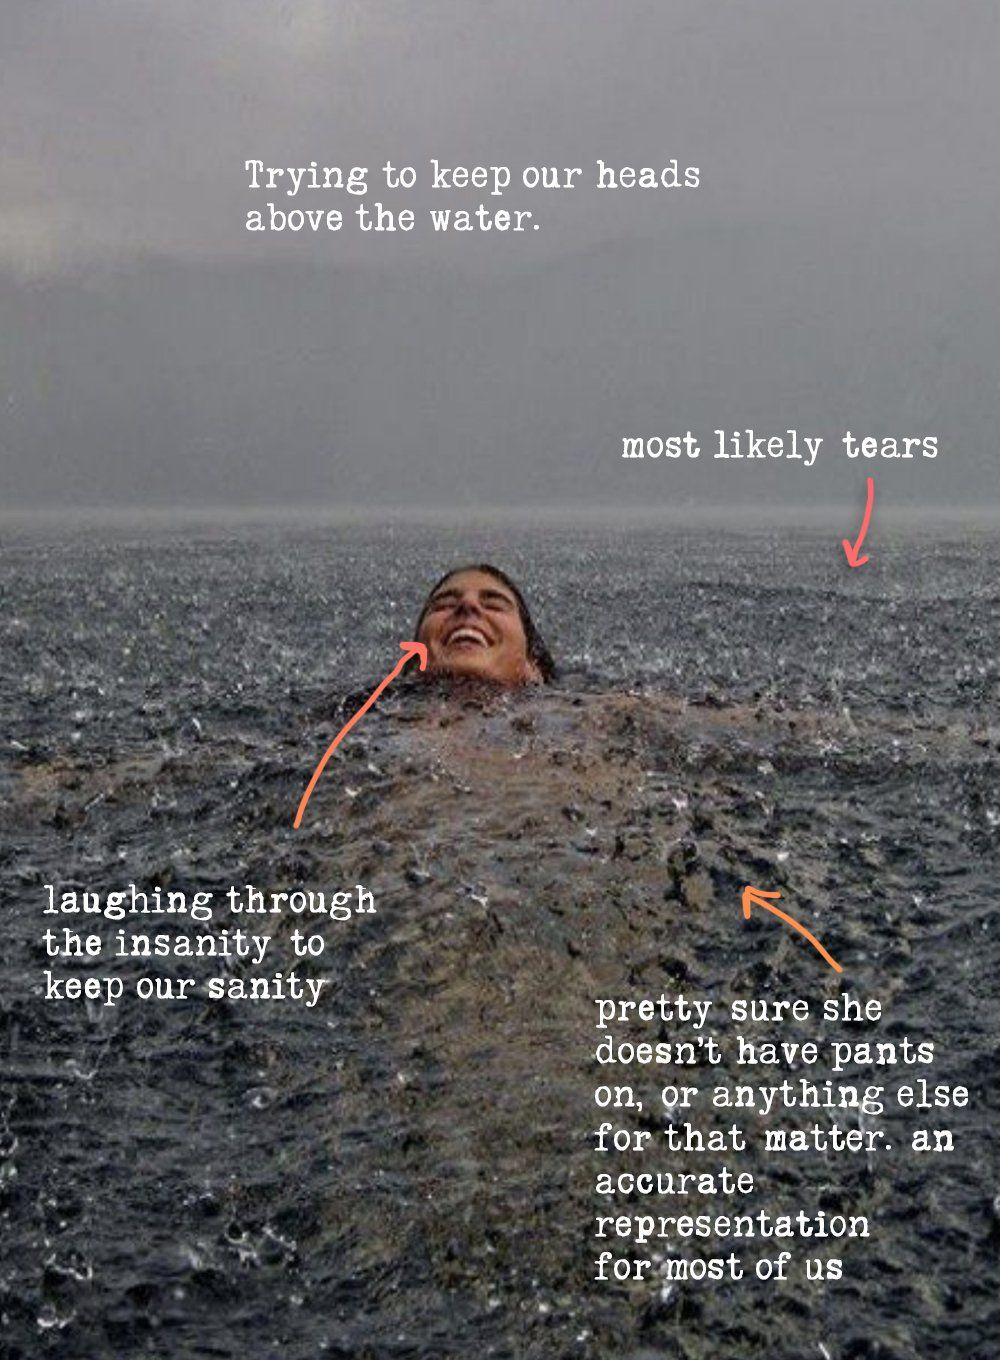 Girl skinny dipping  in deep waters while it is raining, smiling and laughing.